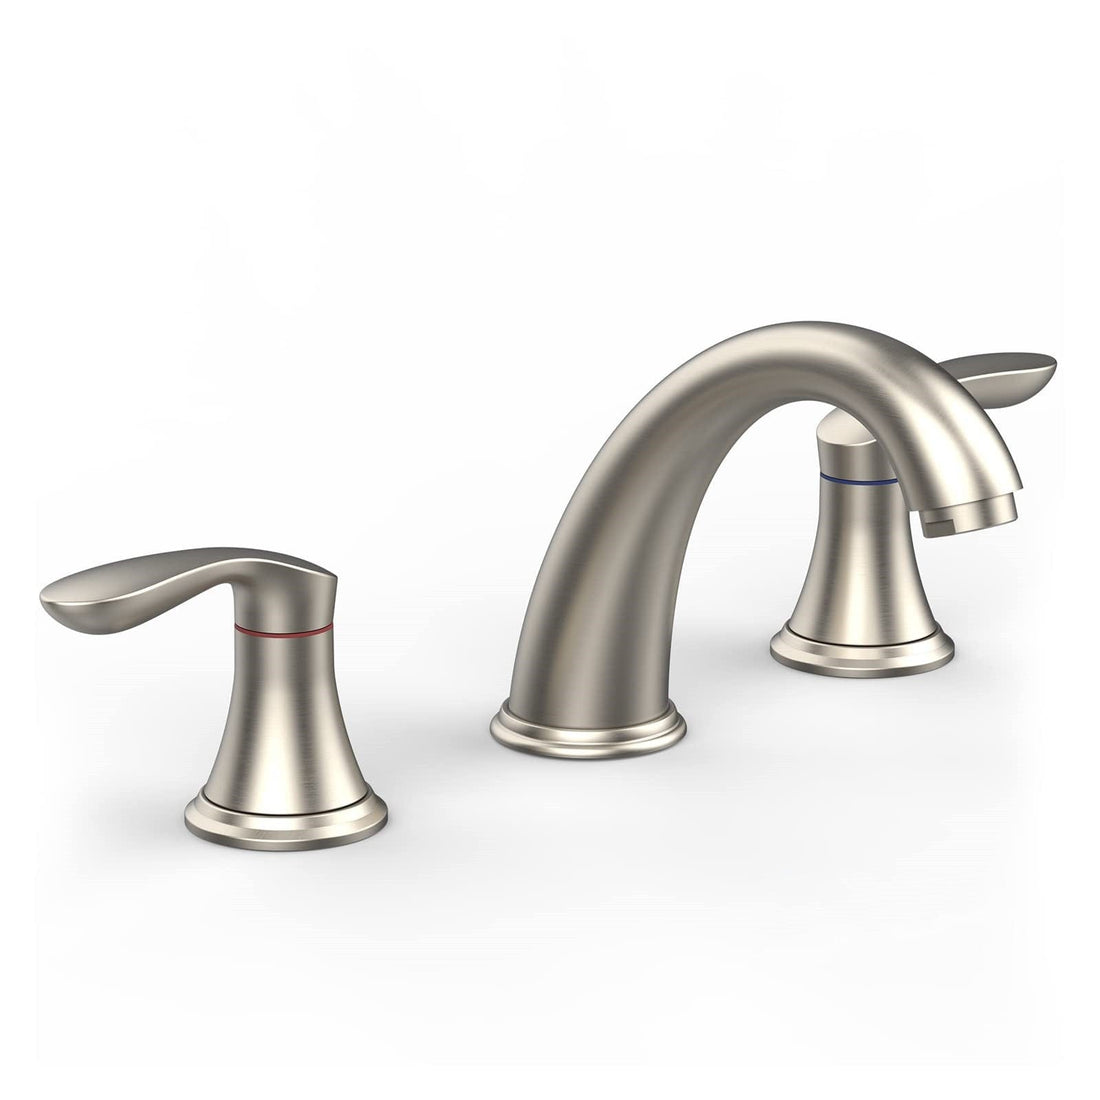 3 Hole Bathroom Sink Faucet, Pop-Up Drain, Hot/Cold Lines(8 Inch 2 Pack / Brushed Nickel)